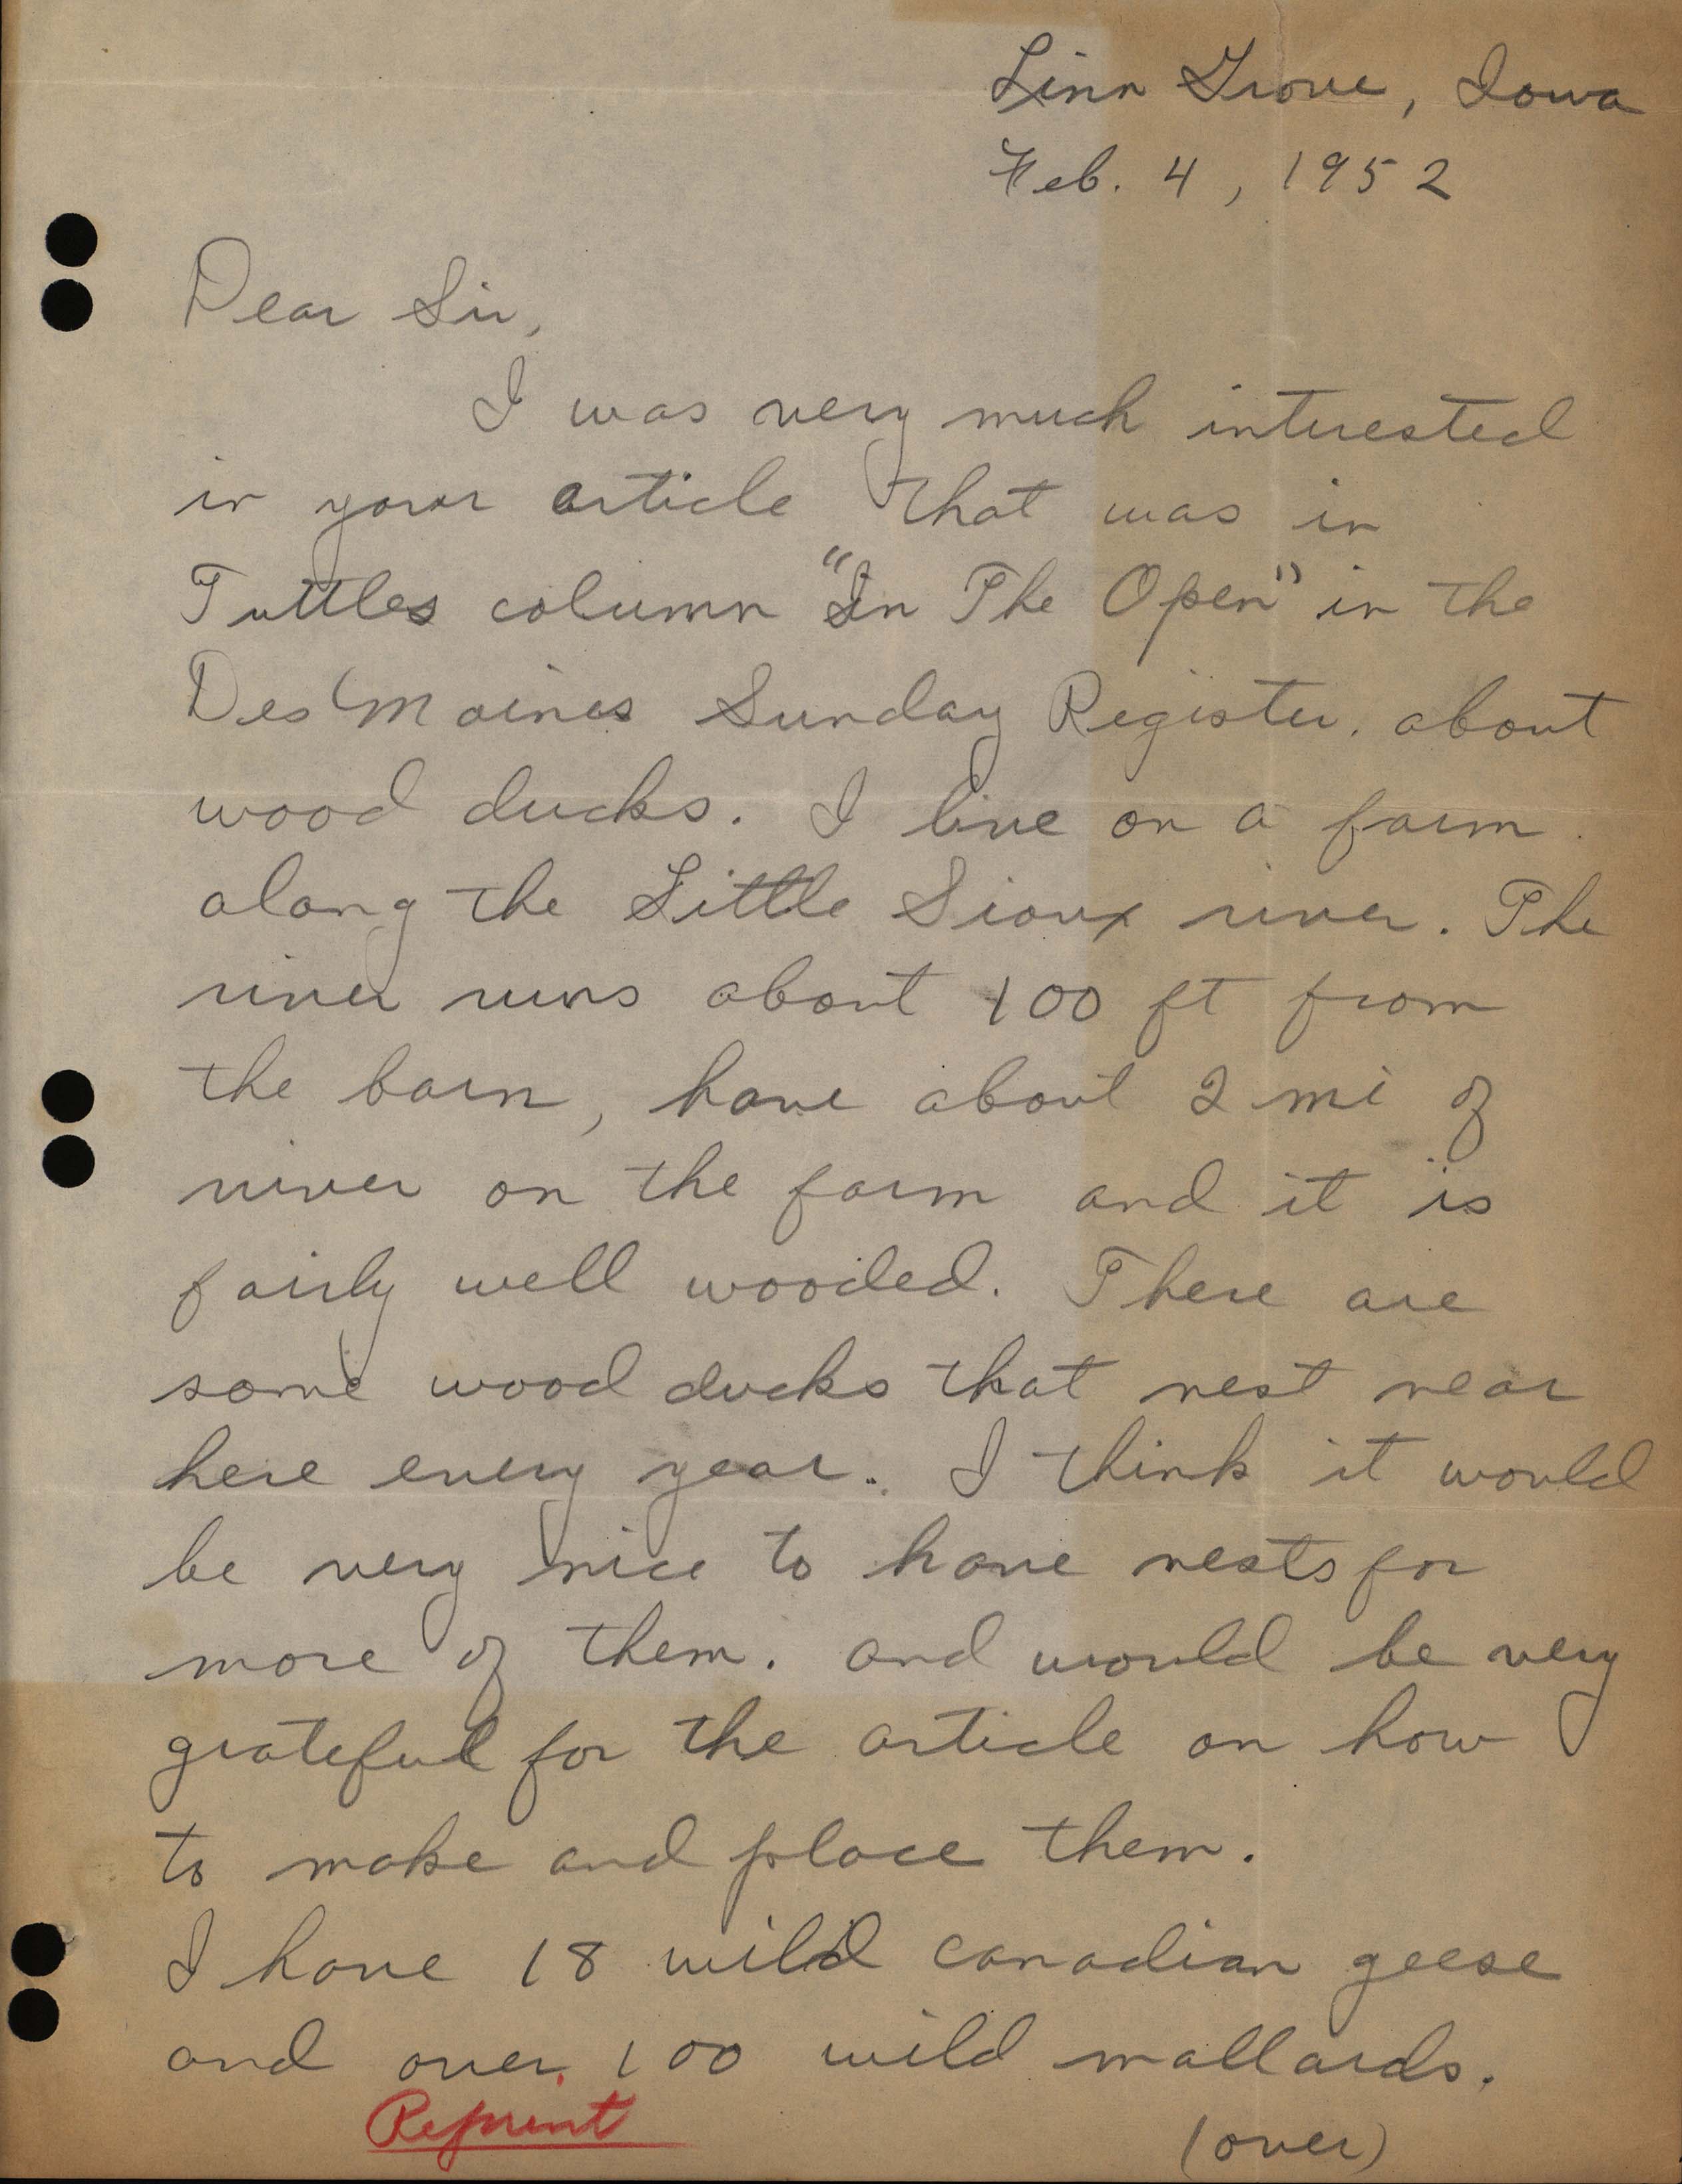 Raymond Findley letter to Frederic Leopold regarding a request for information on Wood Duck houses, February 4, 1952